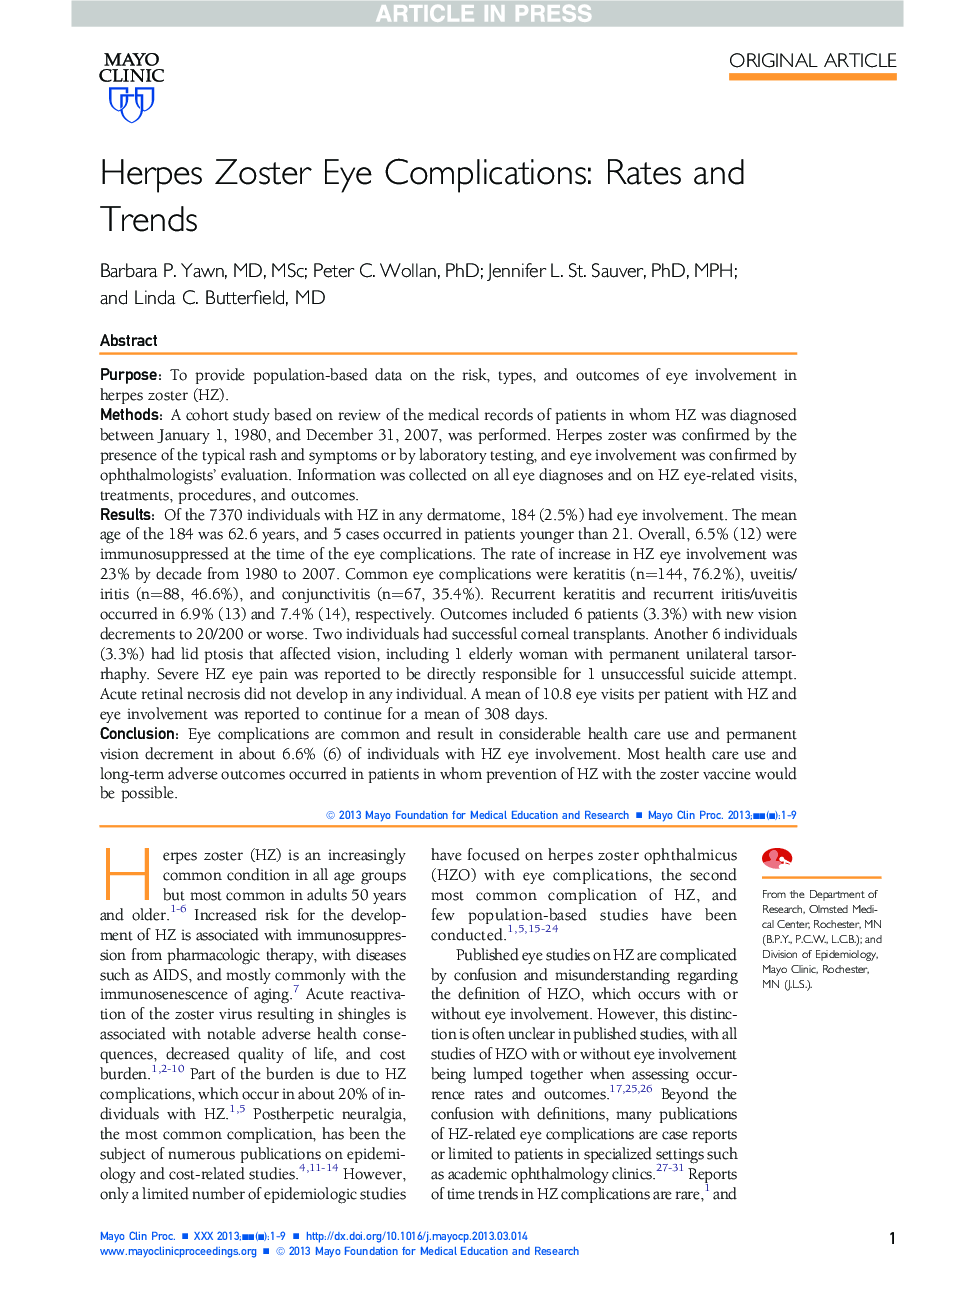 Herpes Zoster Eye Complications: Rates and Trends